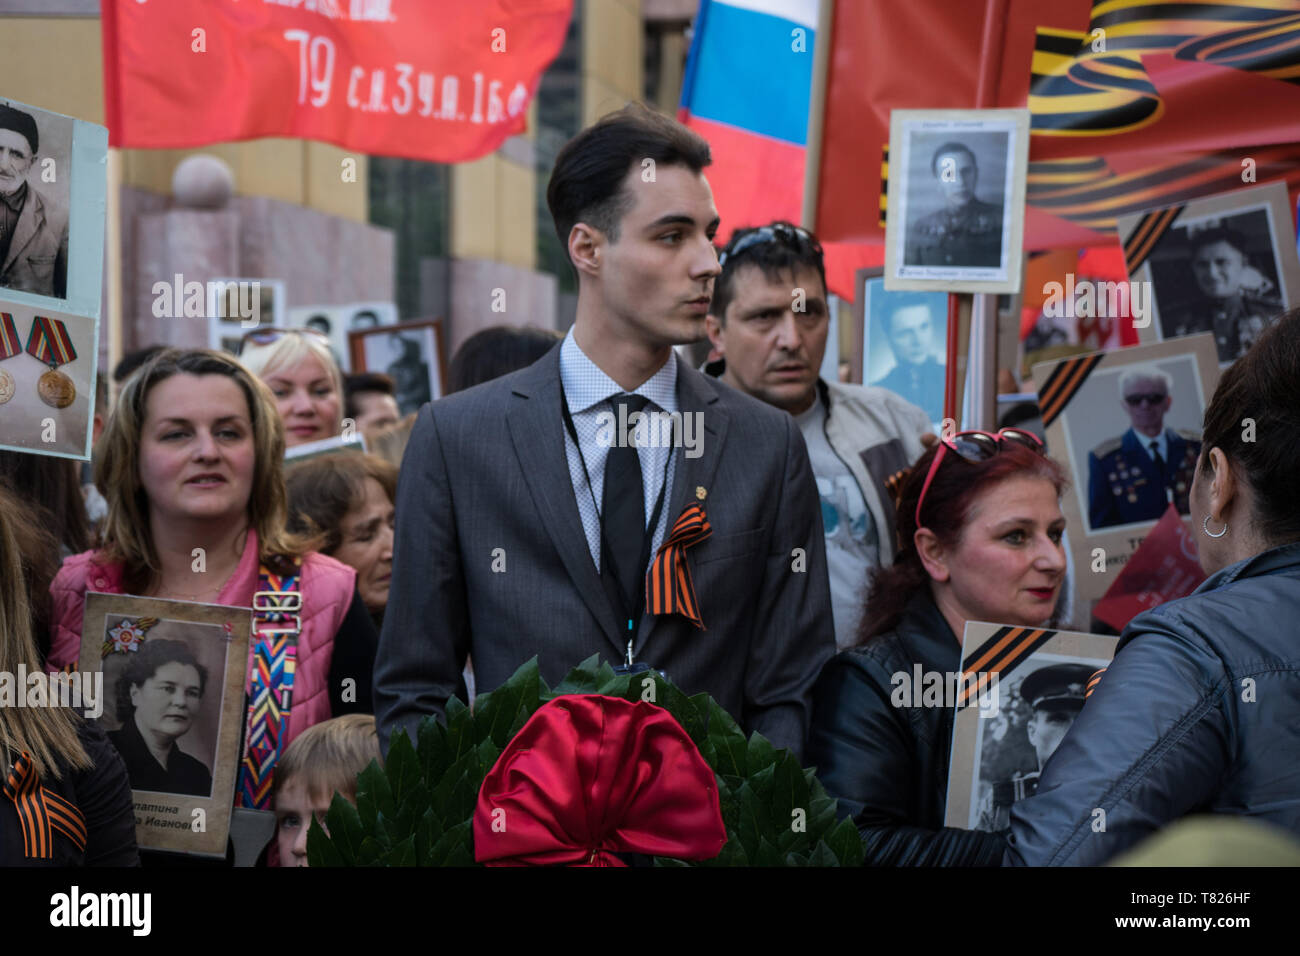 A man seen holding a chaplet during the celebration. Participants celebrated the 74th anniversary for the victory over the Nazis by USSR in World War II by taking part in an Immortal Battalion march. Participants paraded with pictures of their relatives who lost their life in the war to honour them. Stock Photo